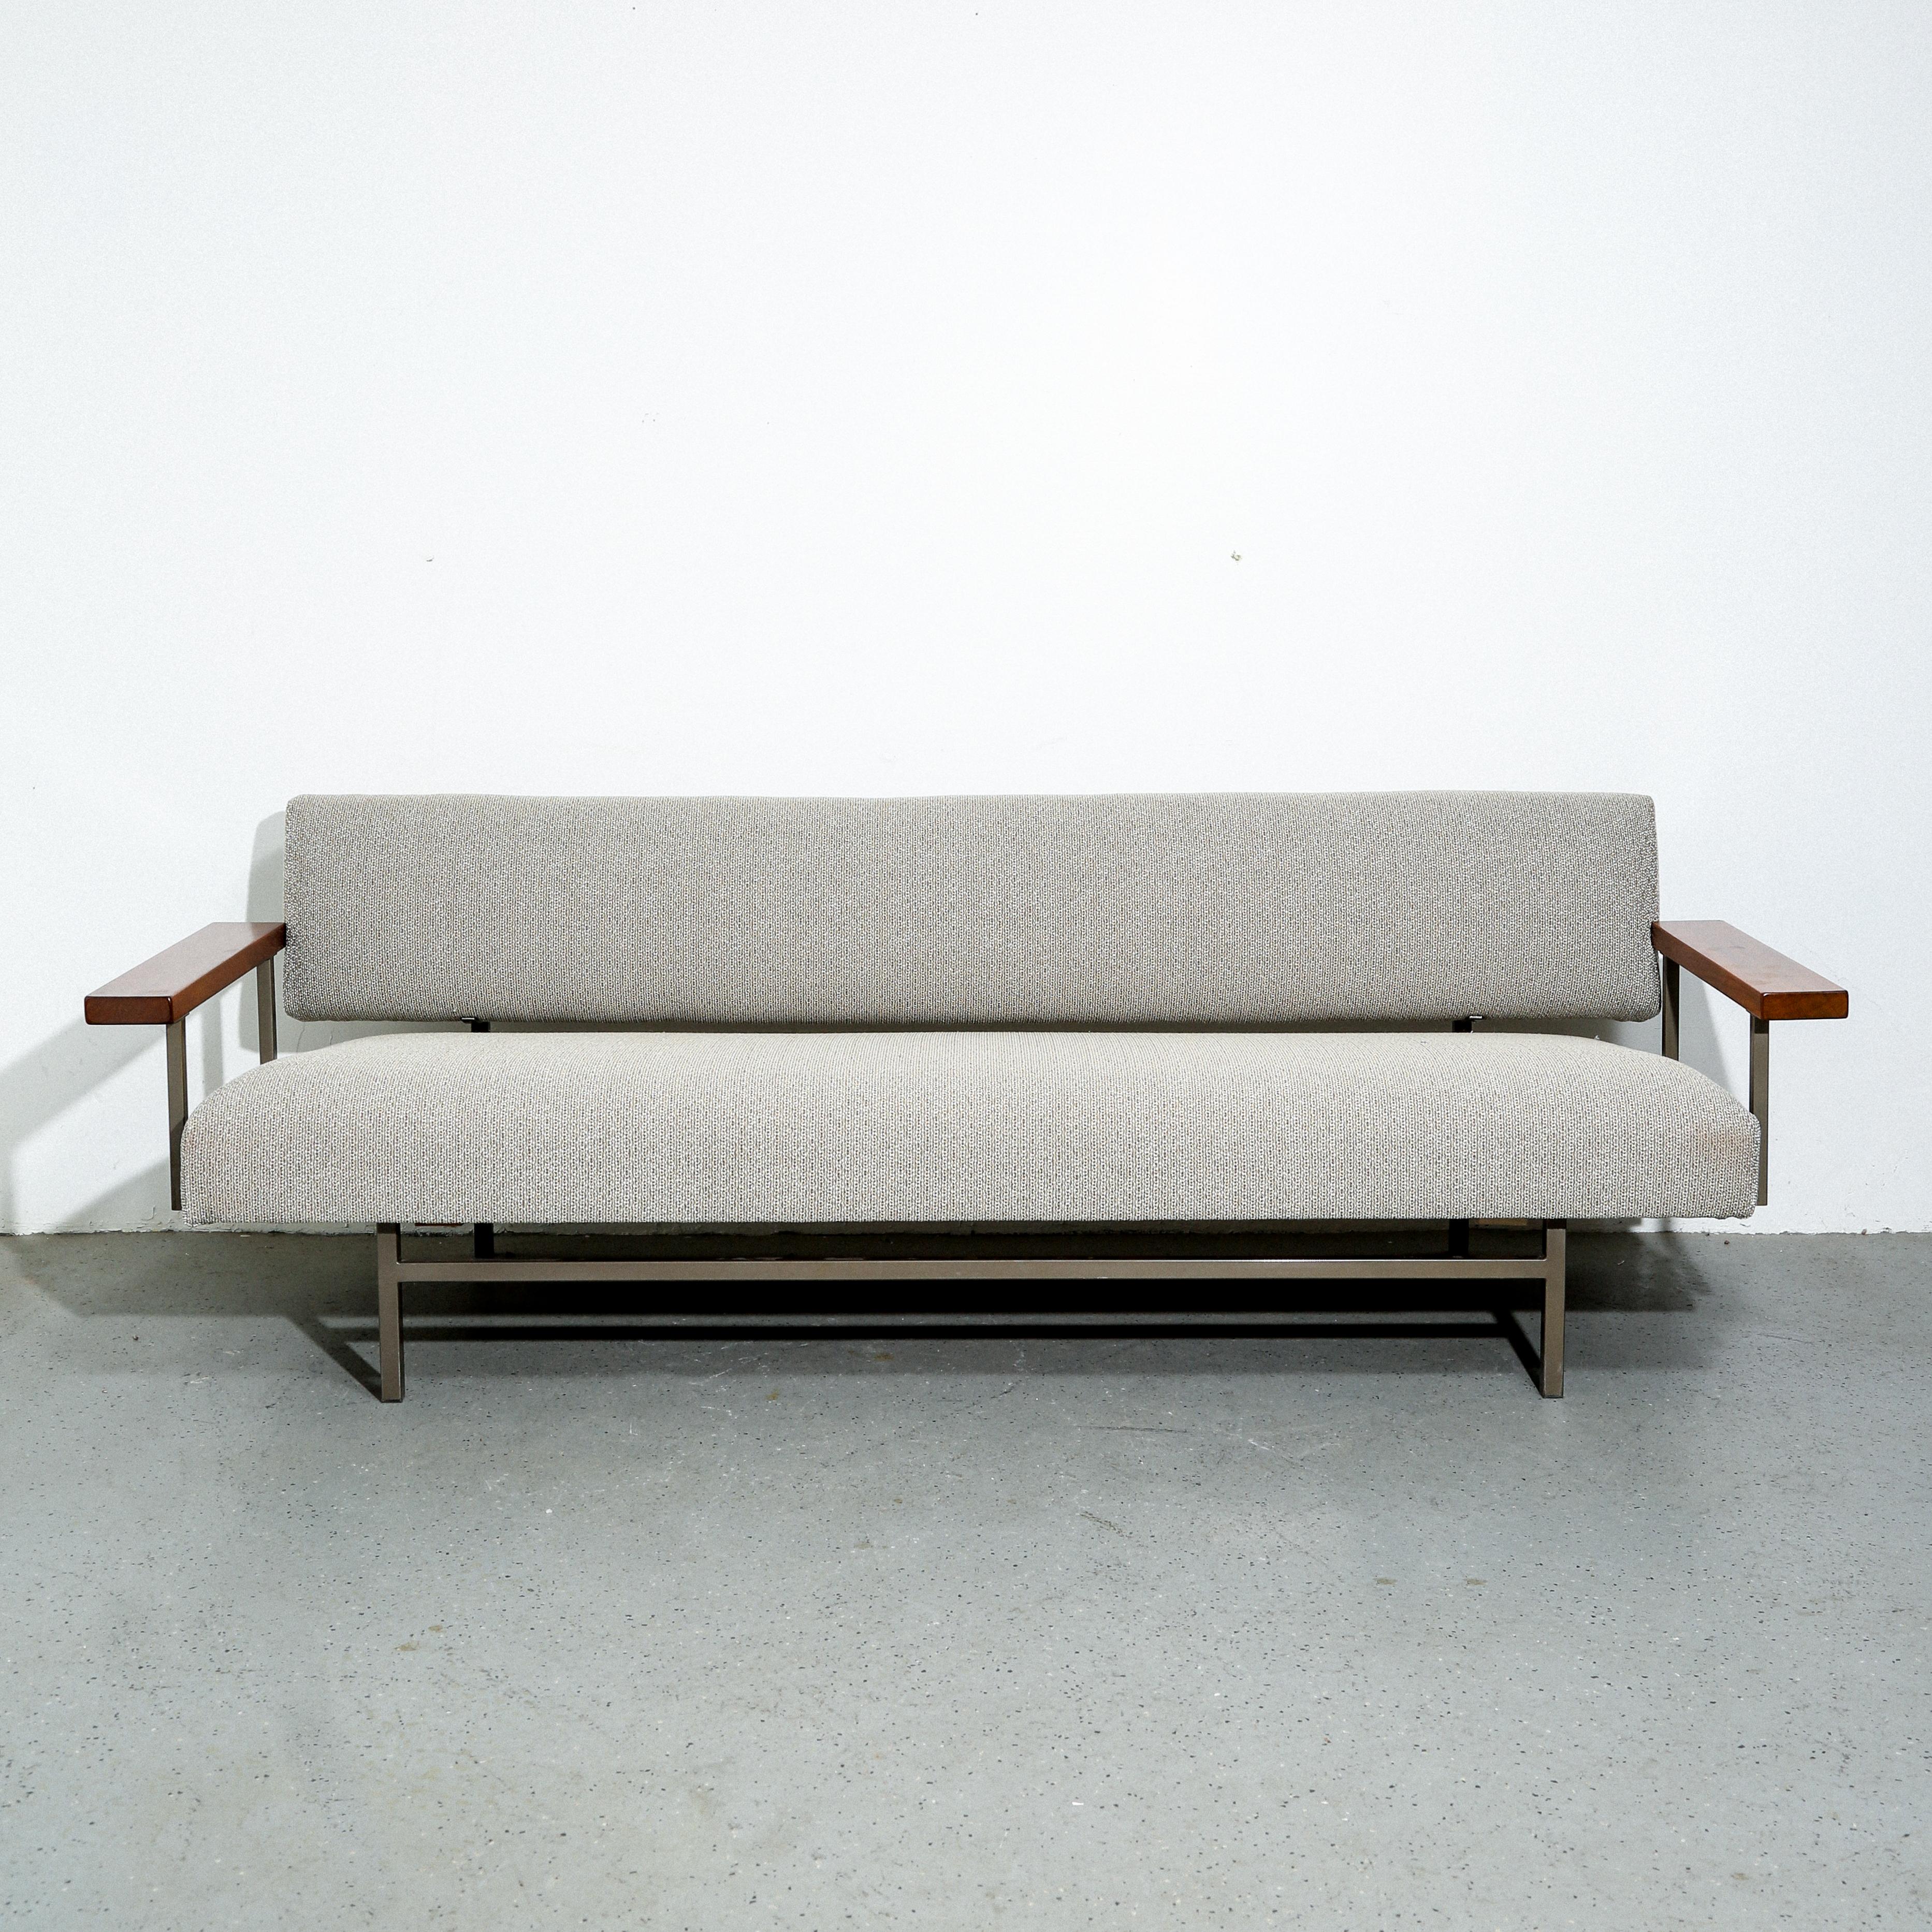 Mid-20th Century “Lotus” Sofa/Daybed By Rob Parry For Gelderland For Sale